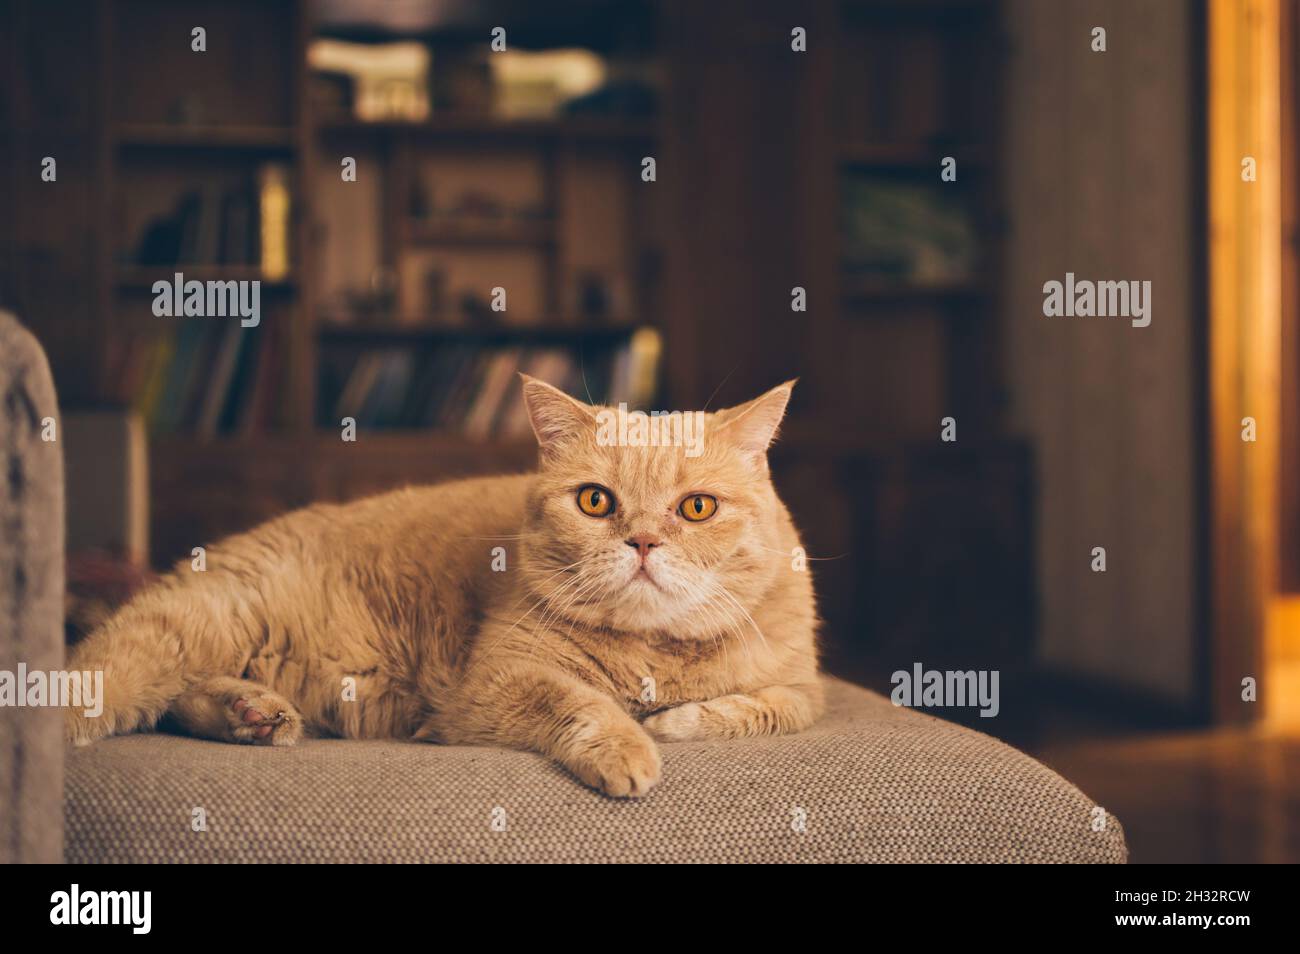 Ginger shorthair Persian exotic cat lying on the sofa on a blurry background of a bookcase Stock Photo